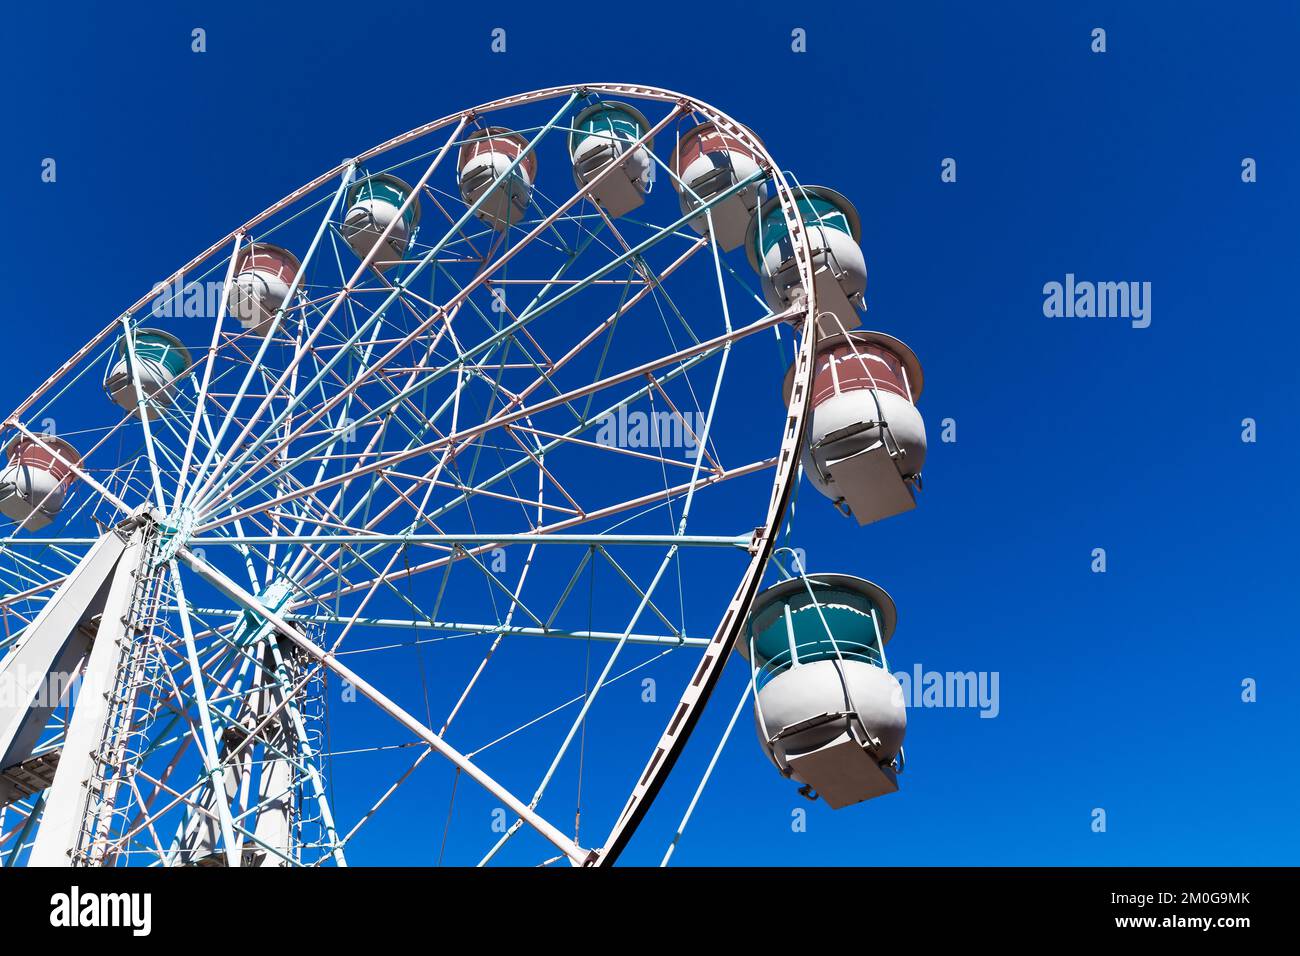 Ferris wheel is under clear blue sky on a sunny day Stock Photo